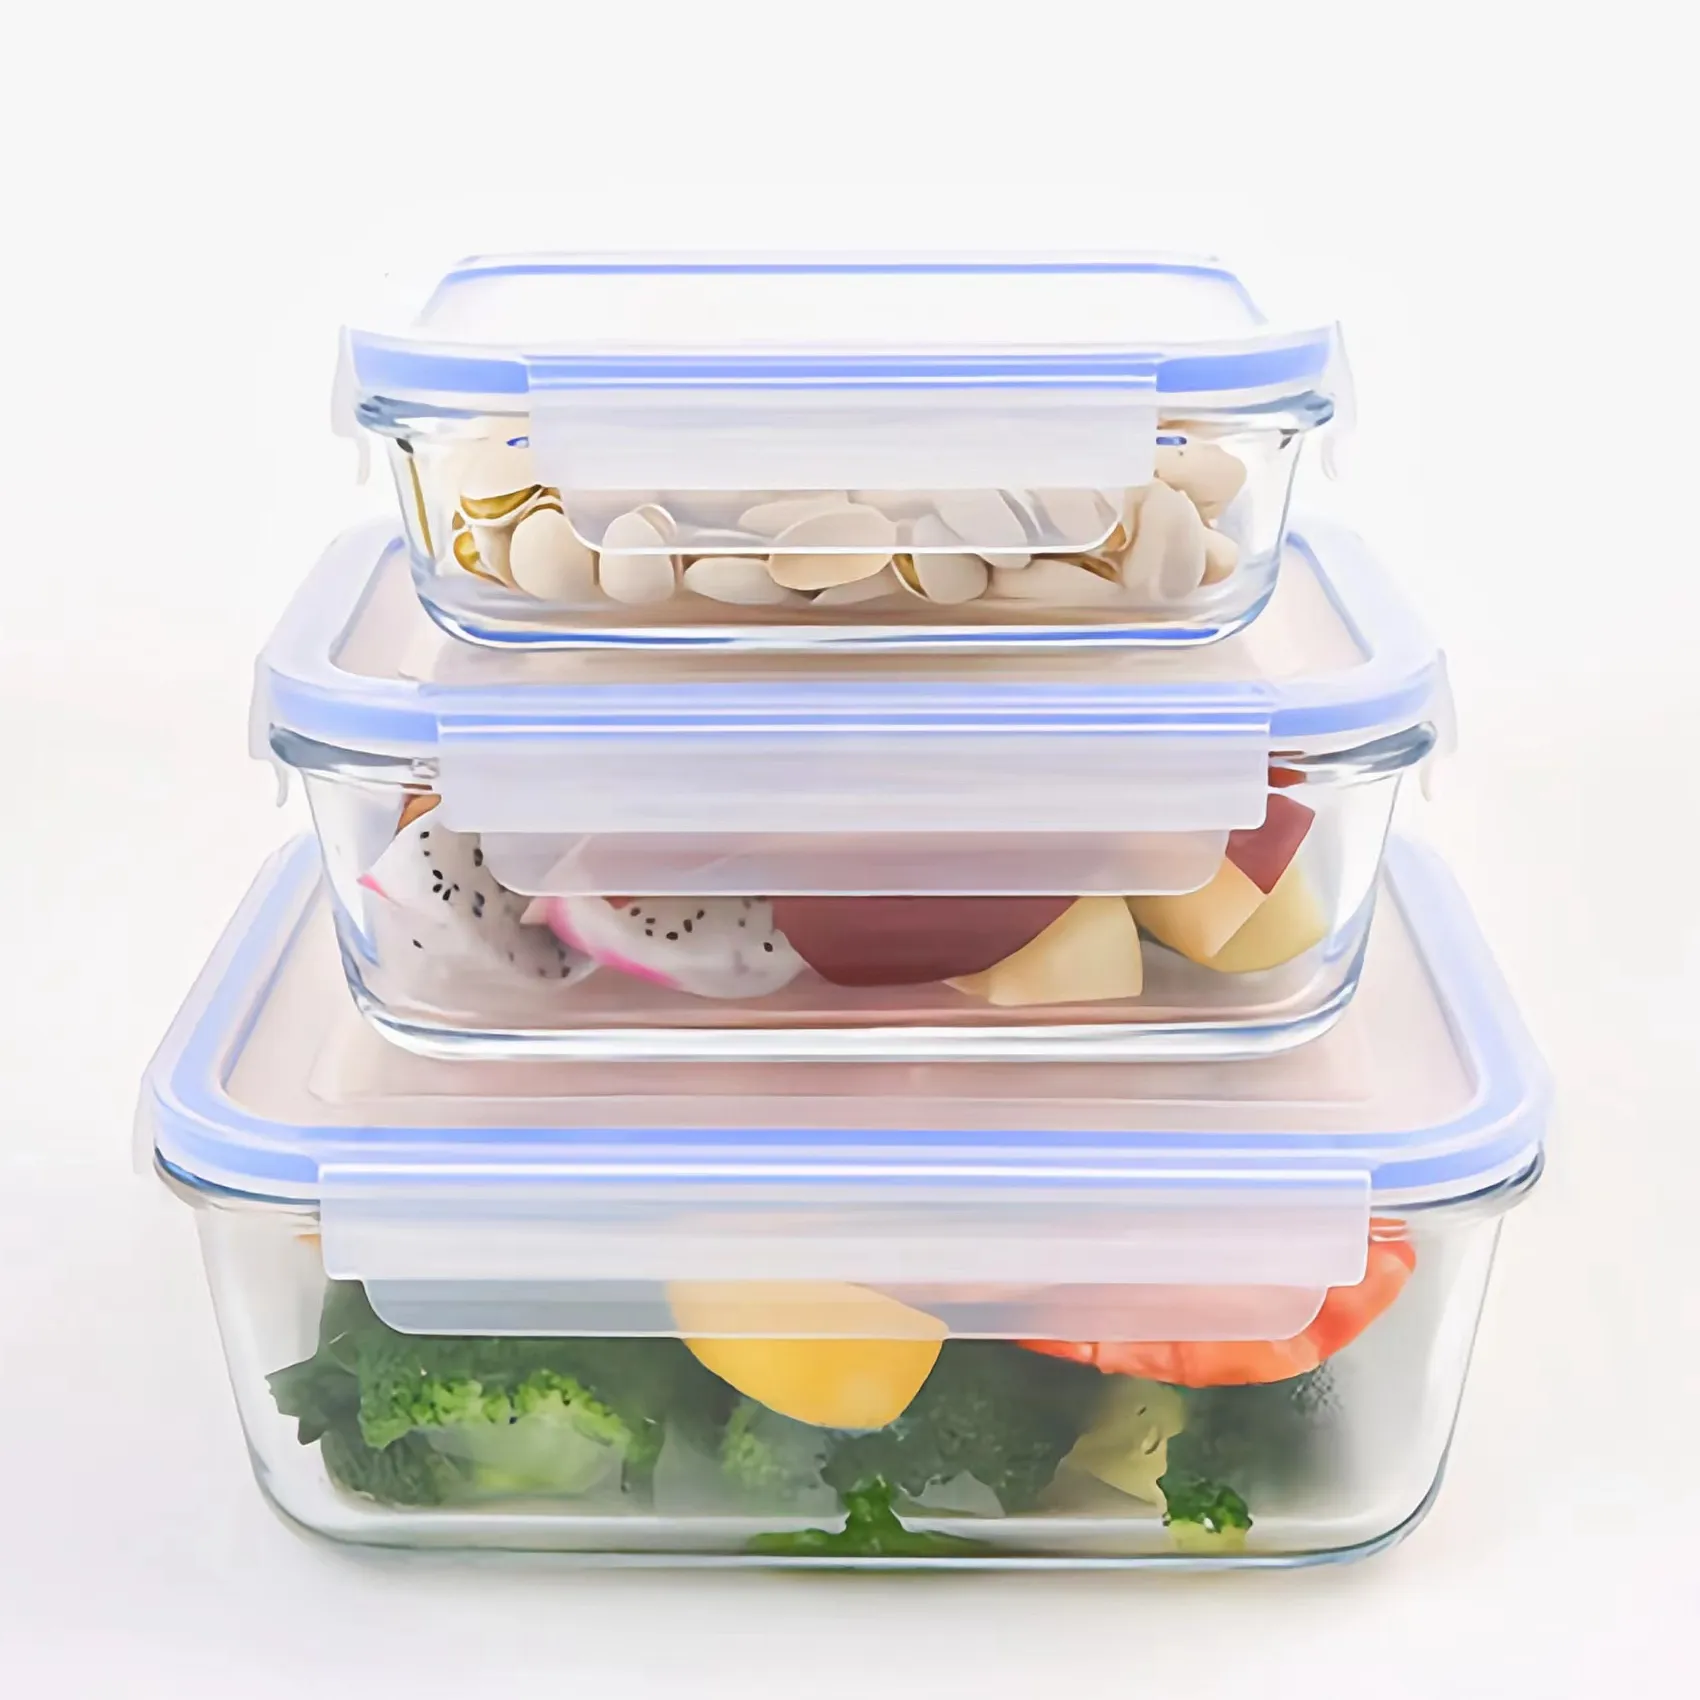 Hermetic Microwave Oven Use Safe Kitchen Lunch Box Leakproof Vacuum Seal Glass Food Storage Containers For Kitchen Organization